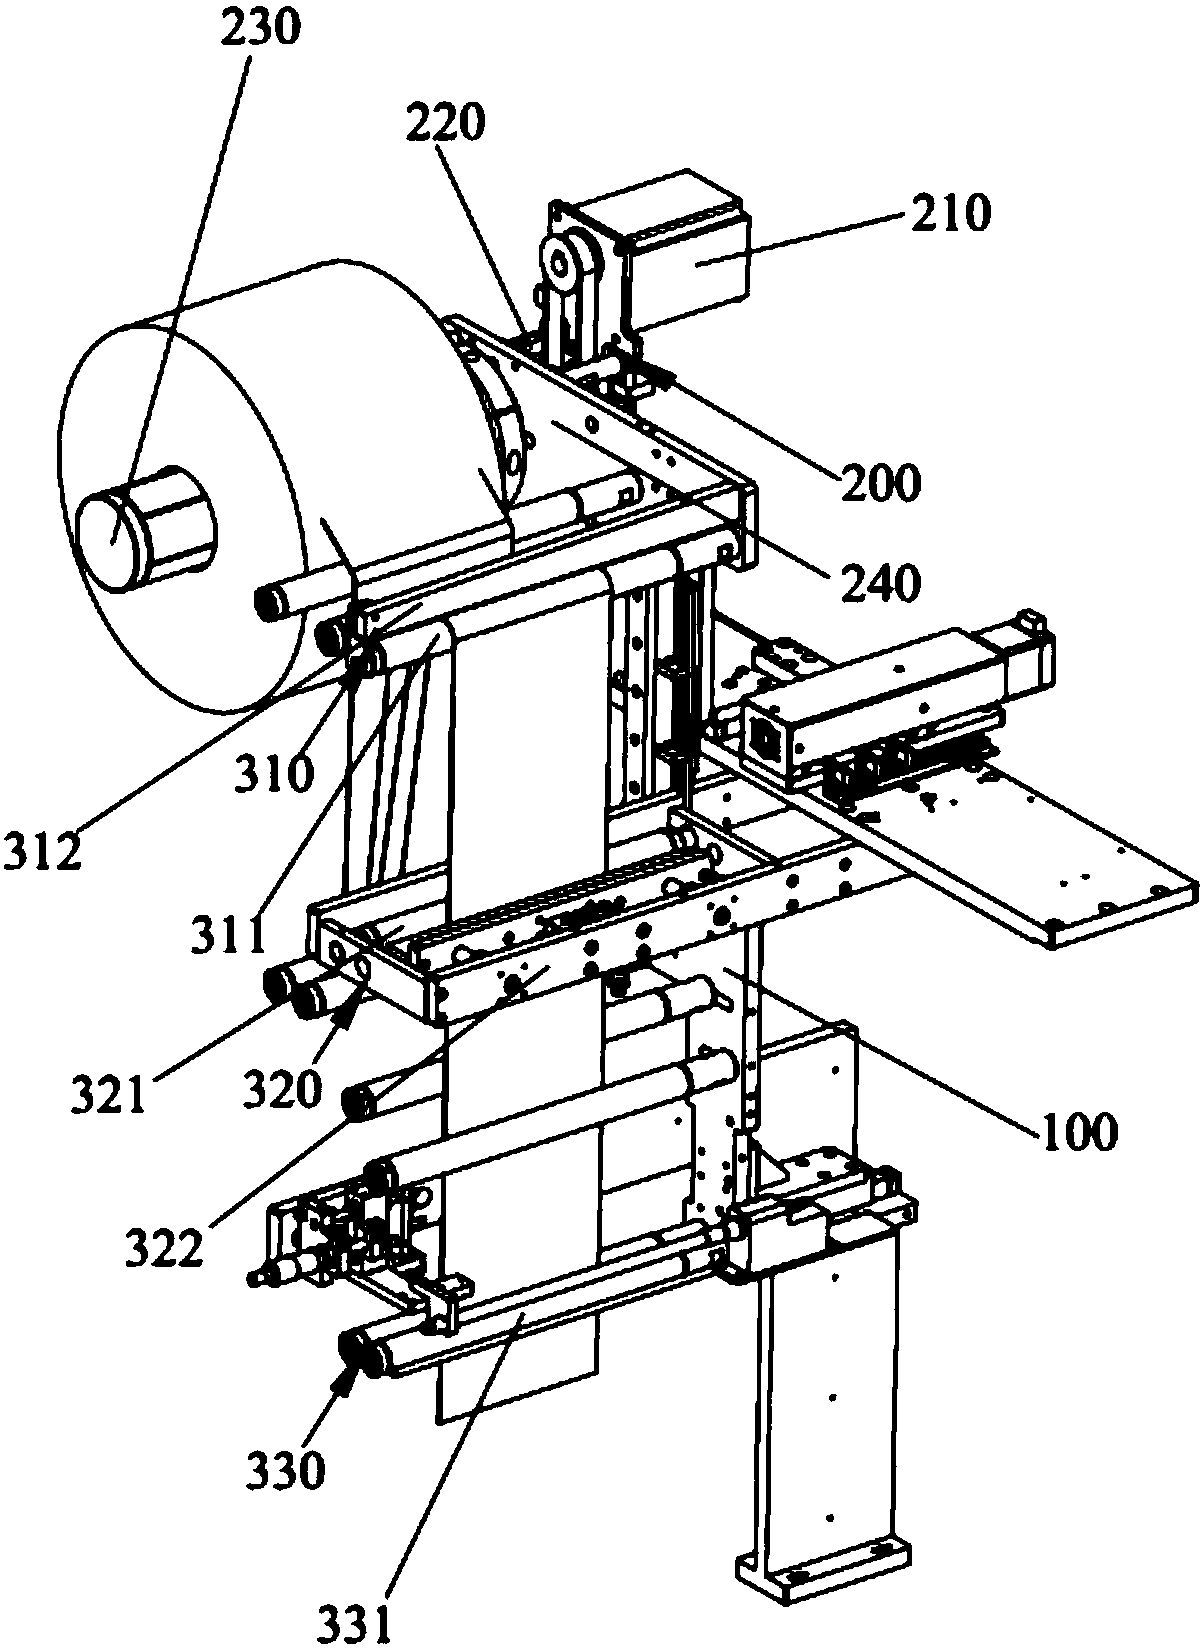 Automatic unwinding mechanism used for cloth